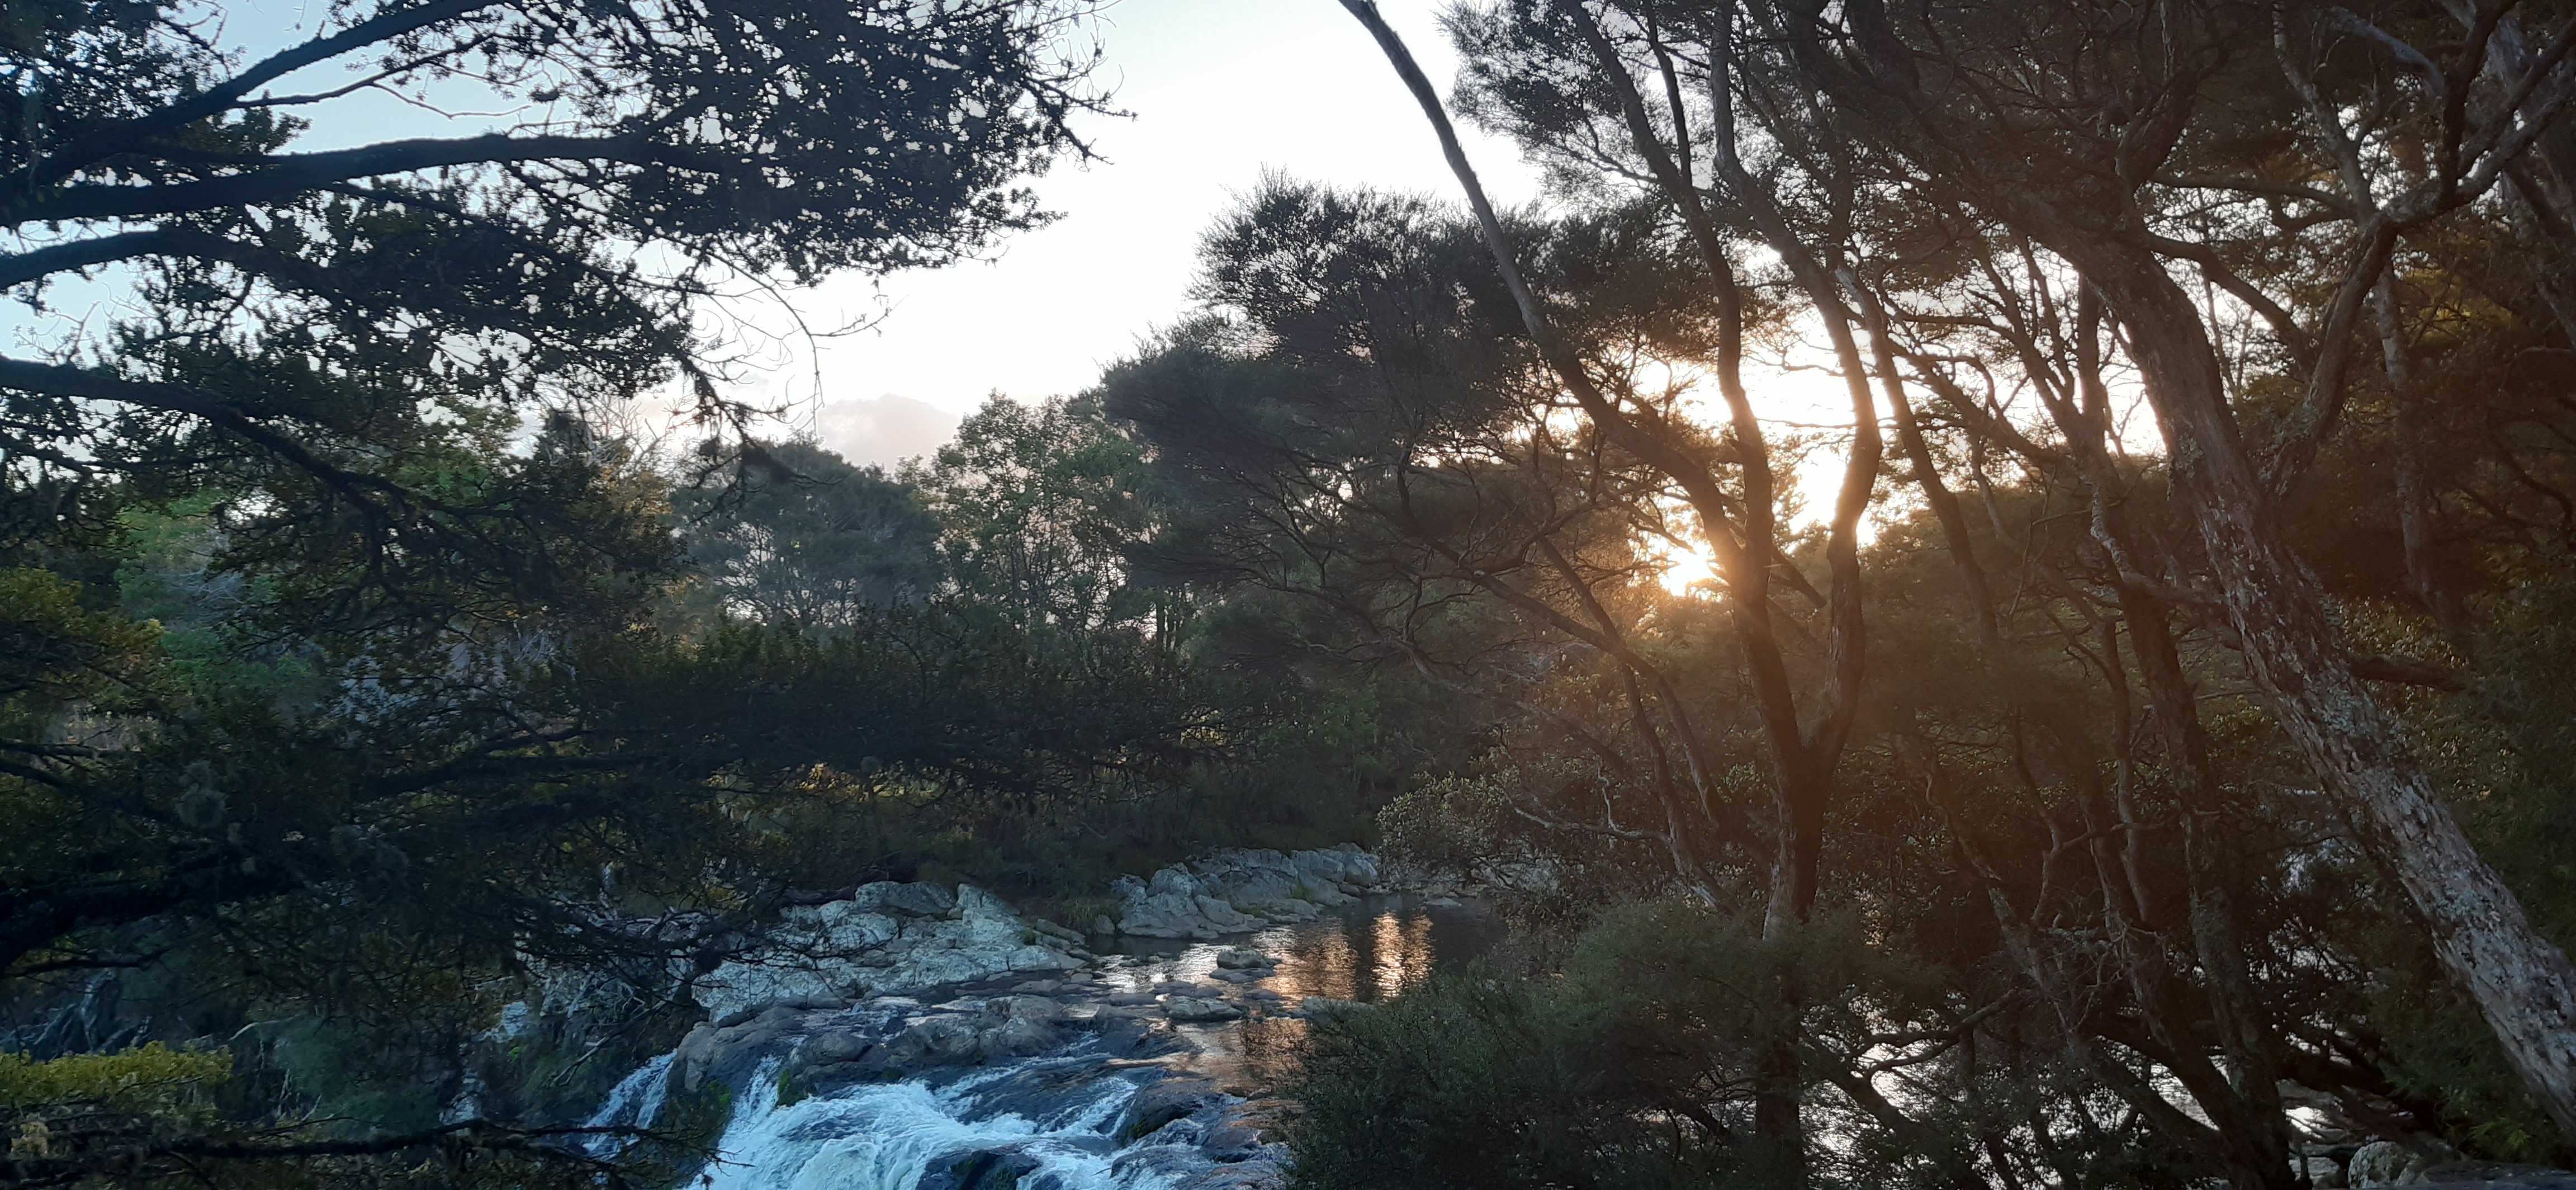 Nature Waterfall Trees River Sunset 4608x2128